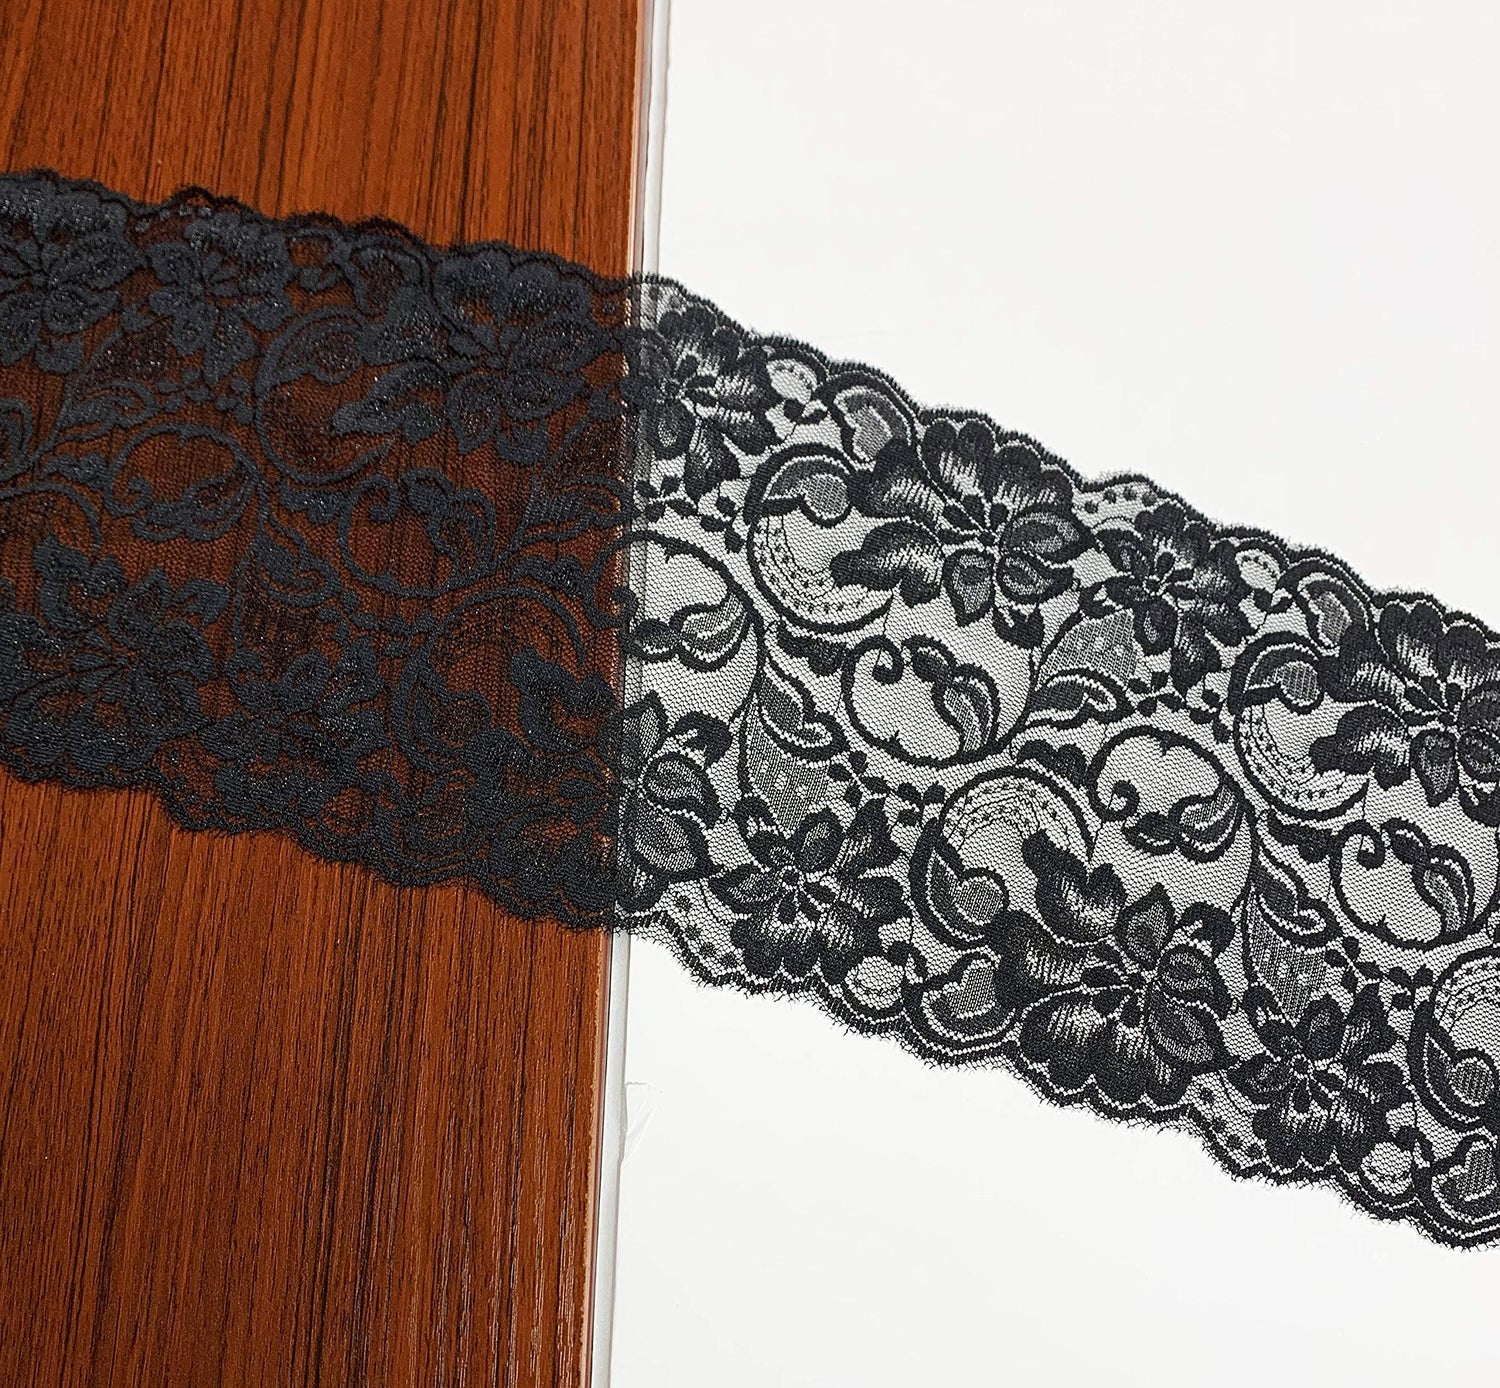 6&quot; Black Lace Tulle Fabric Ribbon | Stretchy Material | Perfect for DIY Decoration and Craft